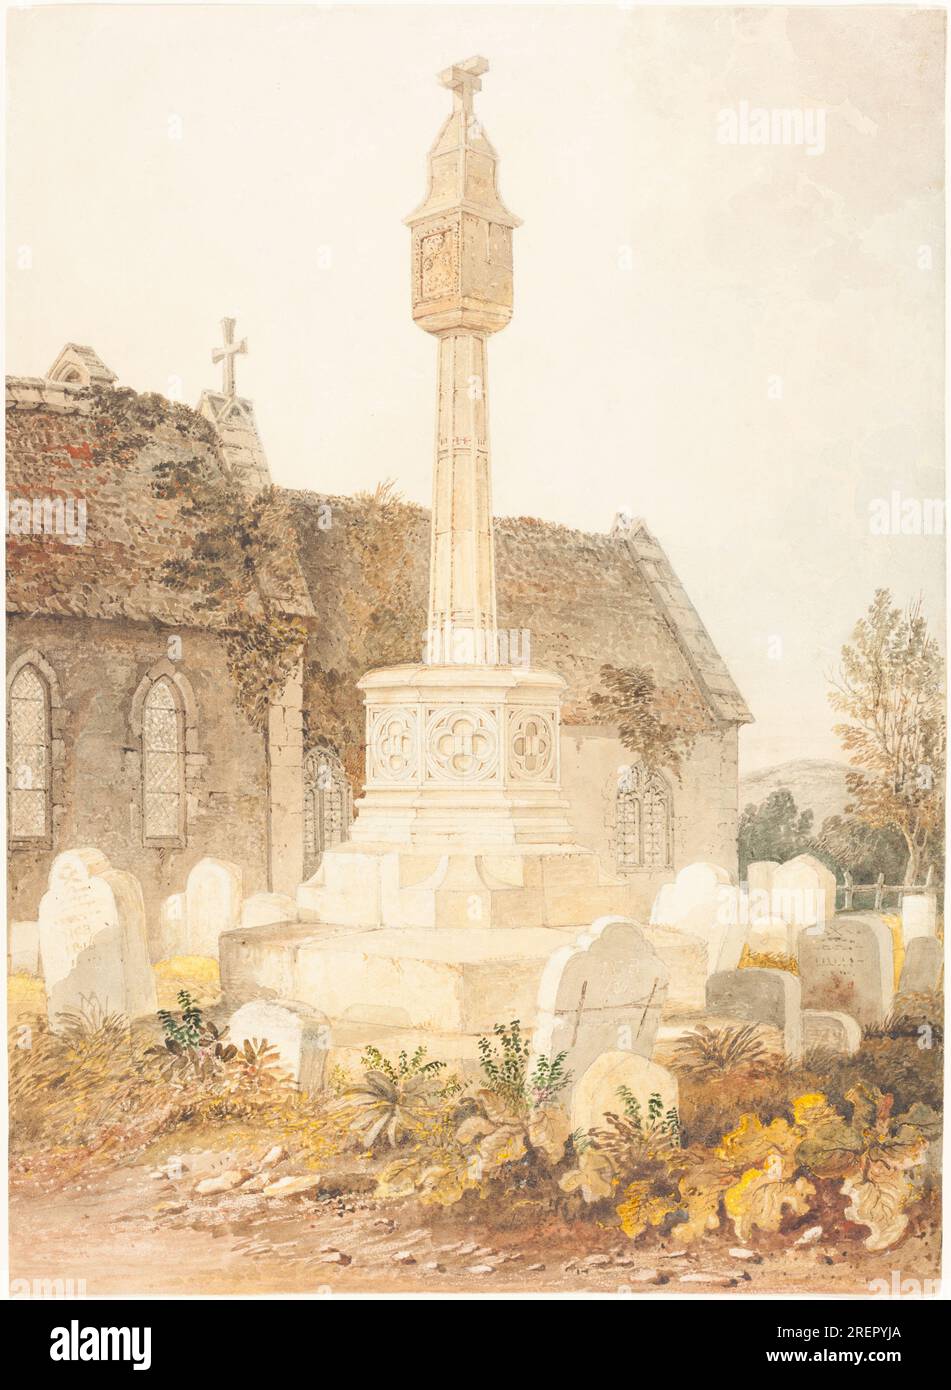 'John Chessell Buckler, Monument in a Church Cemetery, 1816, watercolor over graphite on wove paper, overall: 36.2 x 26.3 cm (14 1/4 x 10 3/8 in.), Gift of John Nichols Estabrook and Dorothy Coogan Estabrook, 1988.20.9' Stock Photo